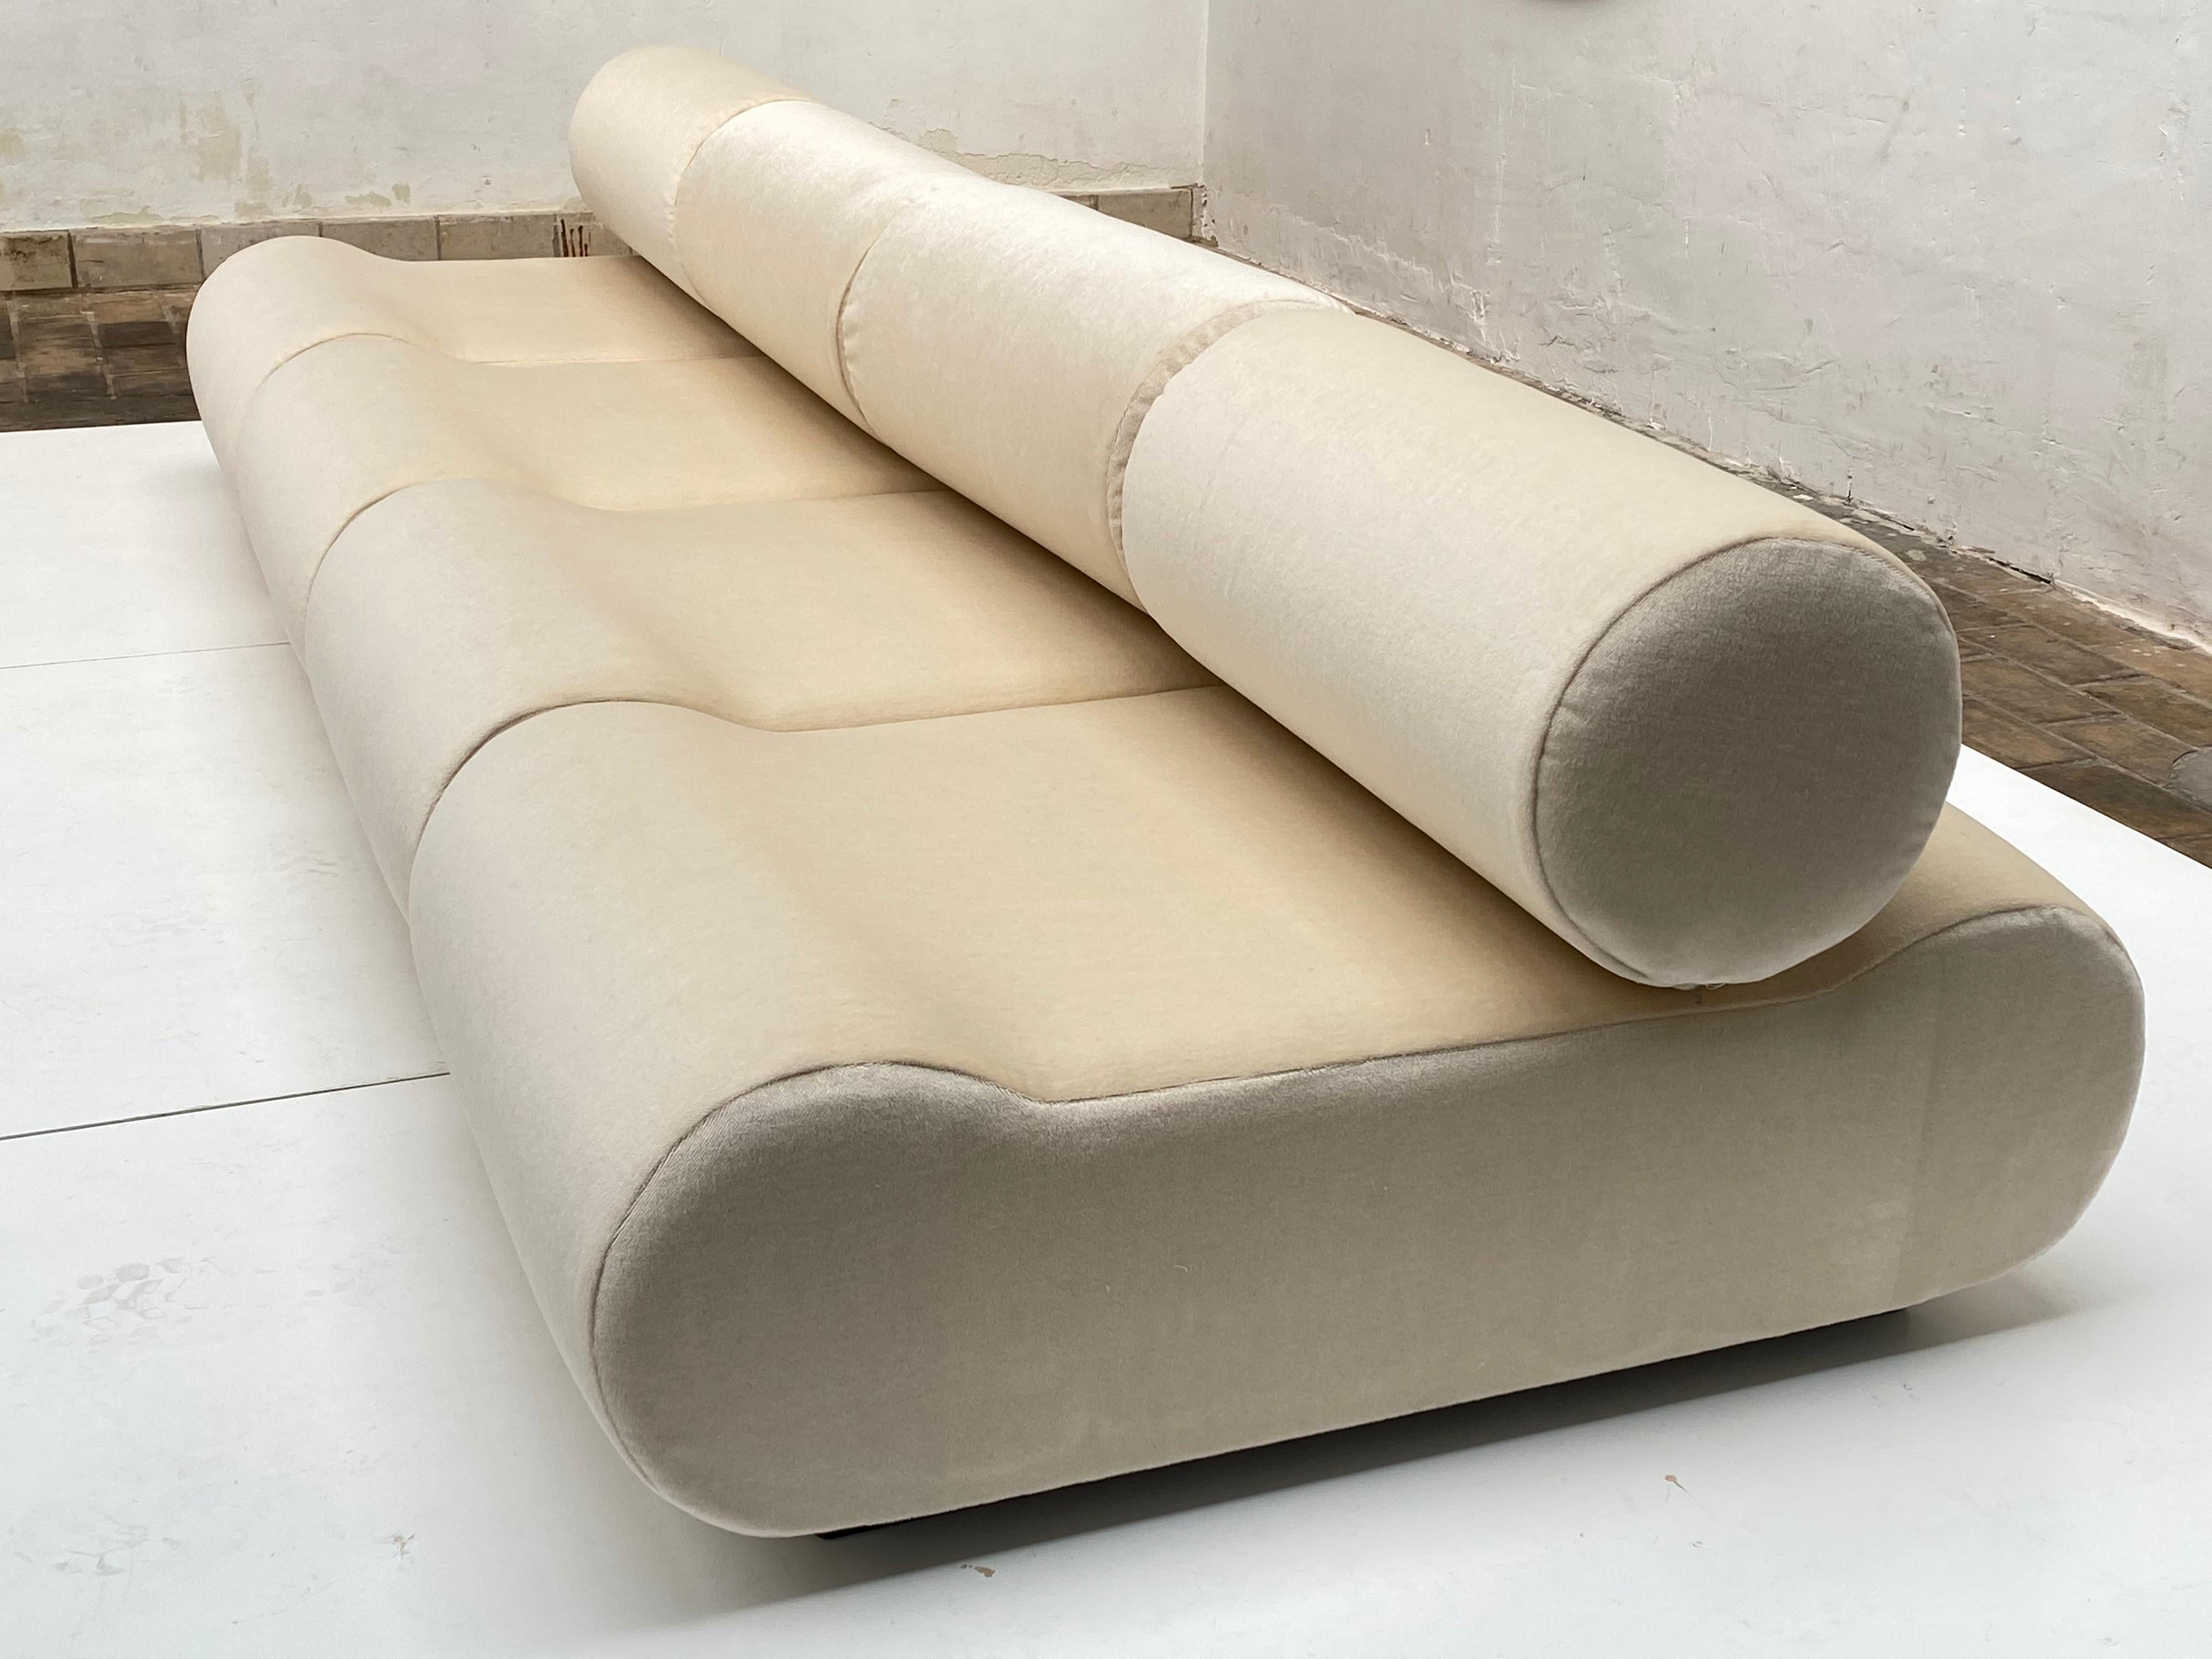 German Seating as Minimalist Sculpture, 4 Elements by Uredat, 1969, Mohair Upholstery For Sale